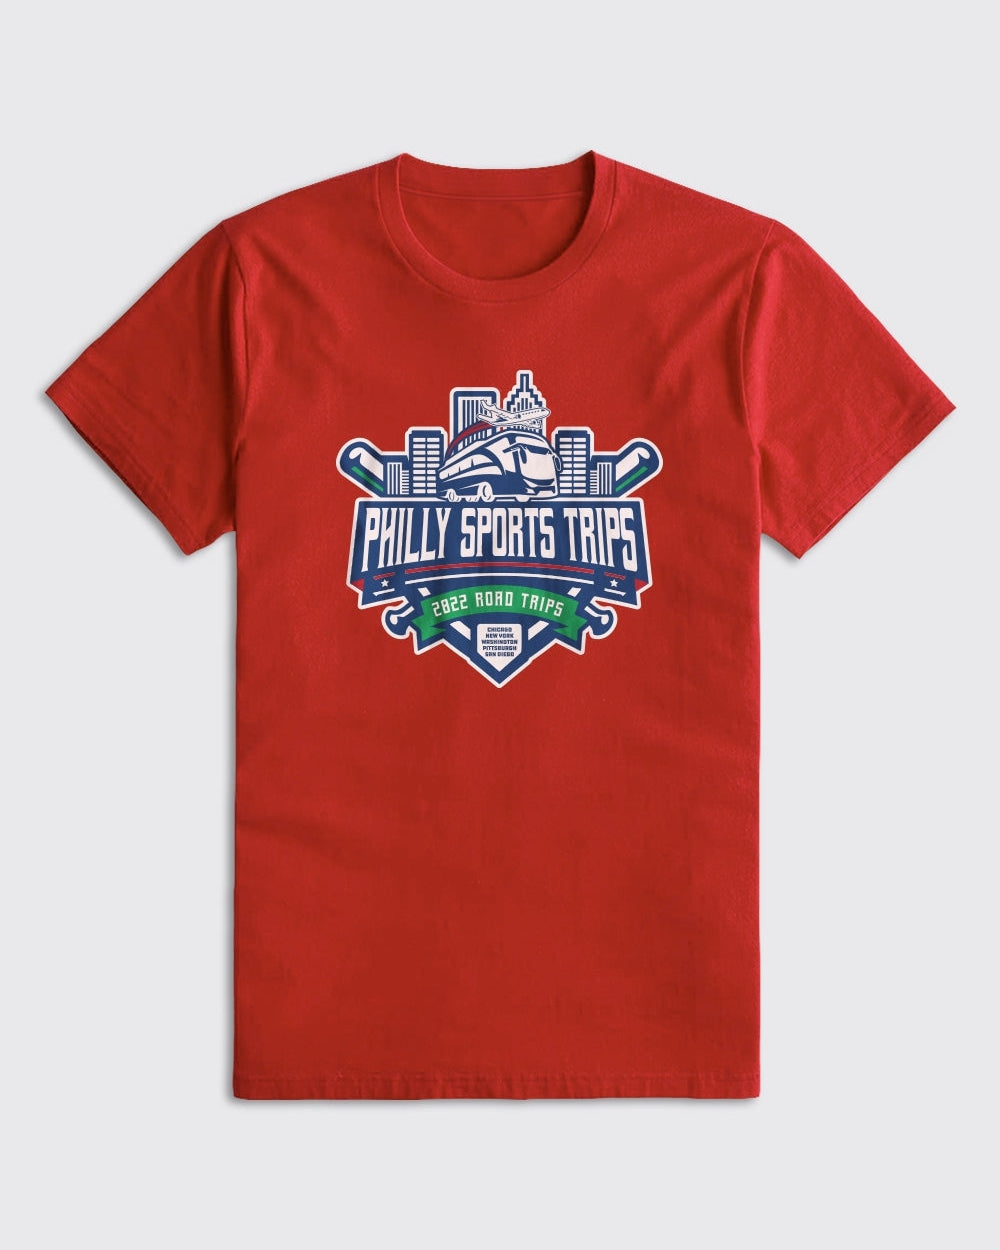 PST Phillies 2022 Road Trips Shirt